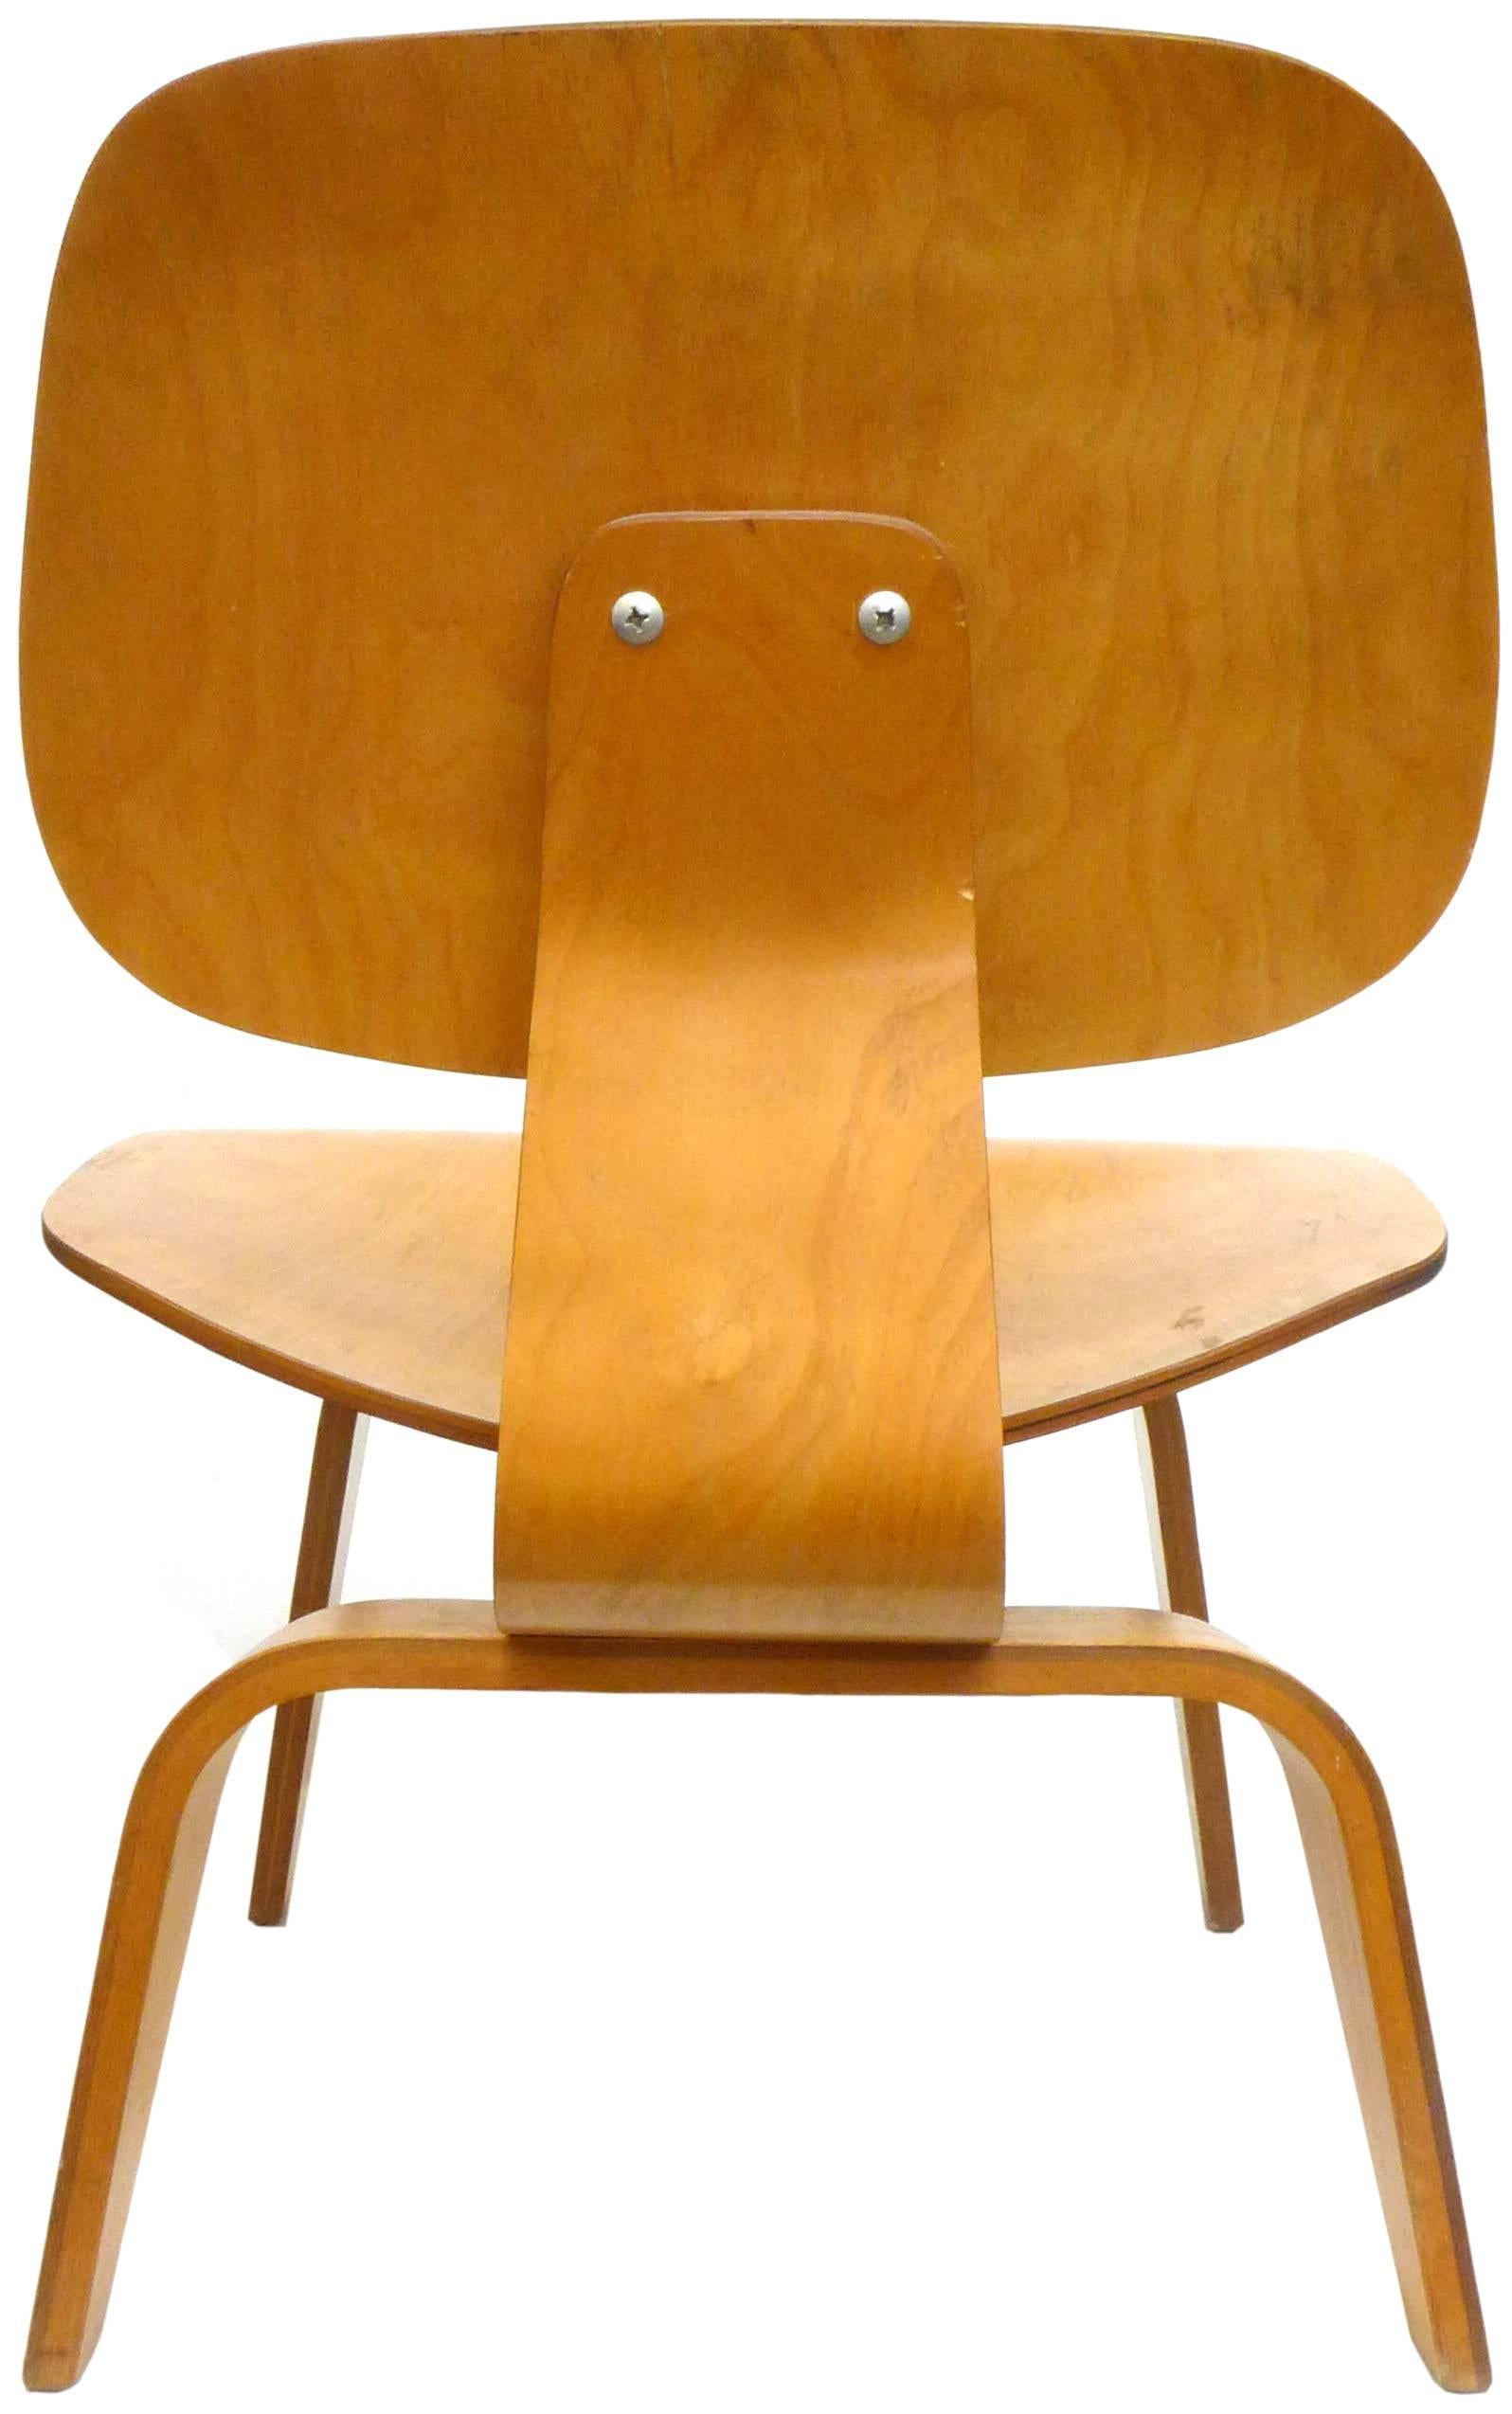 Molded Early Eames Bentwood LCW